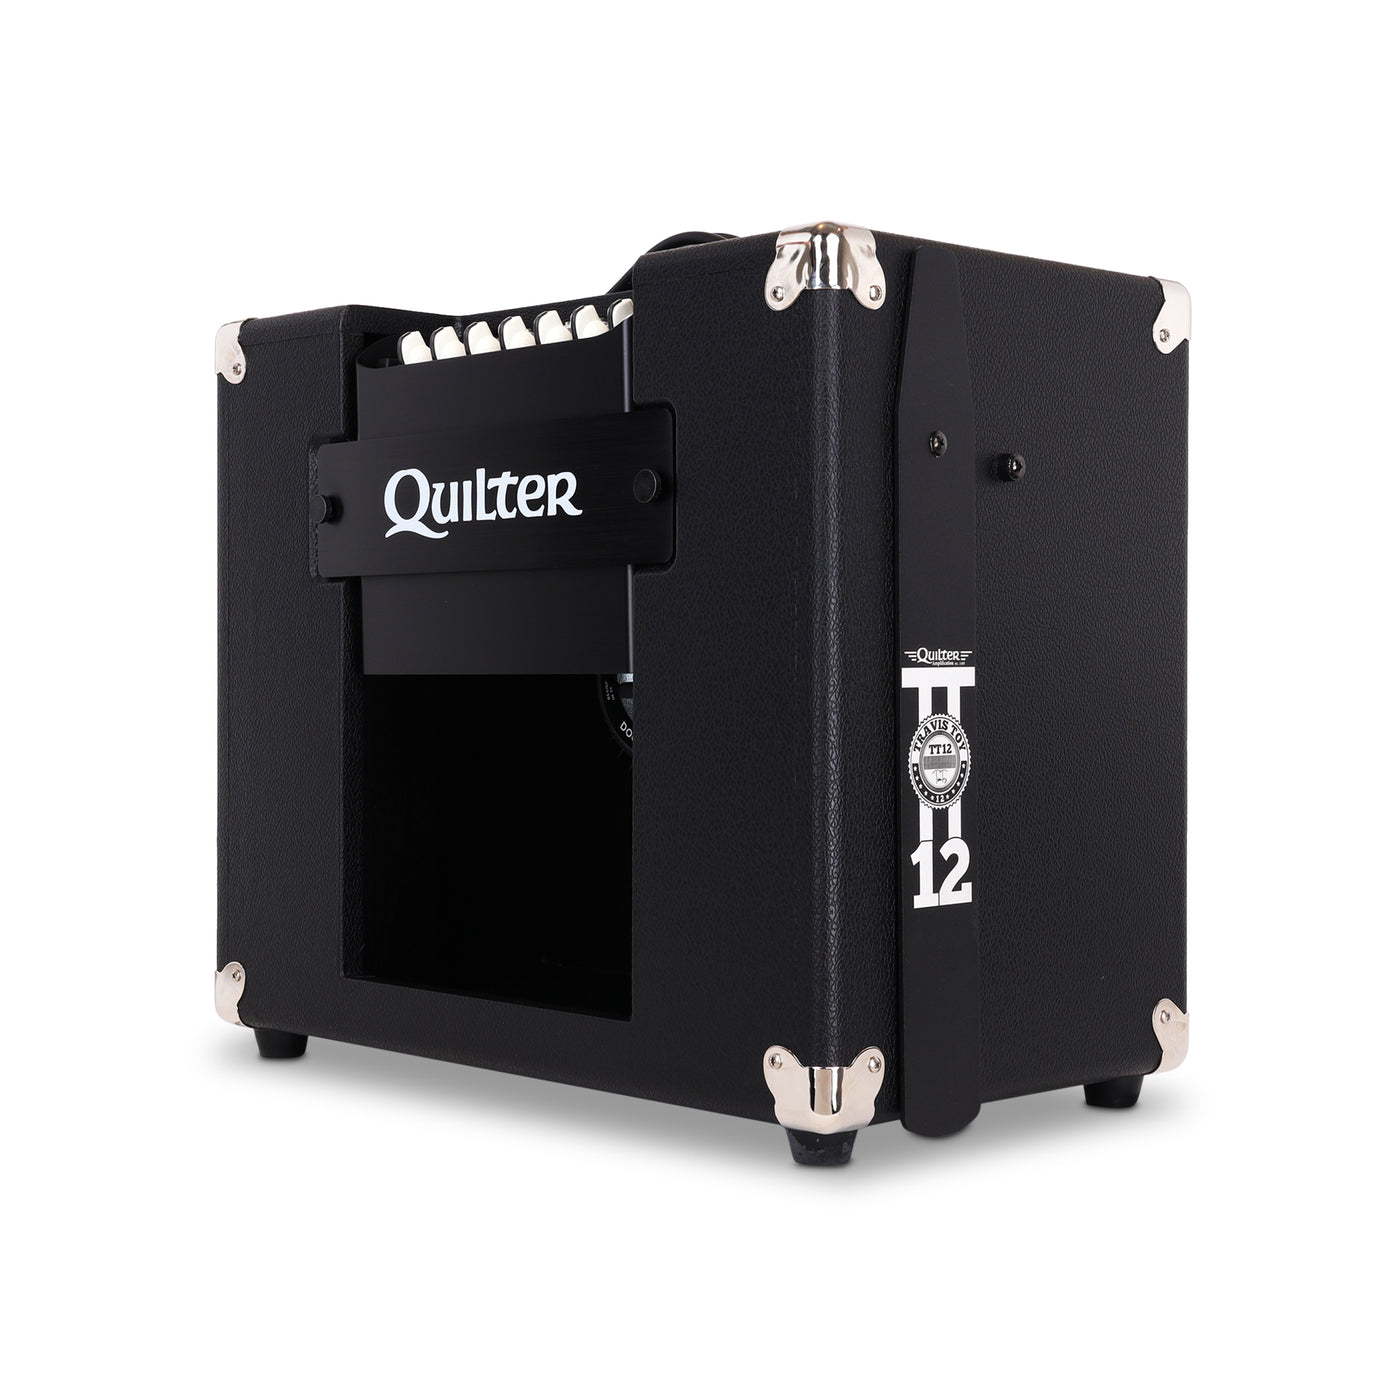 Quilter Labs Travis Toy 12 amplifier - facing diagonally away to the right